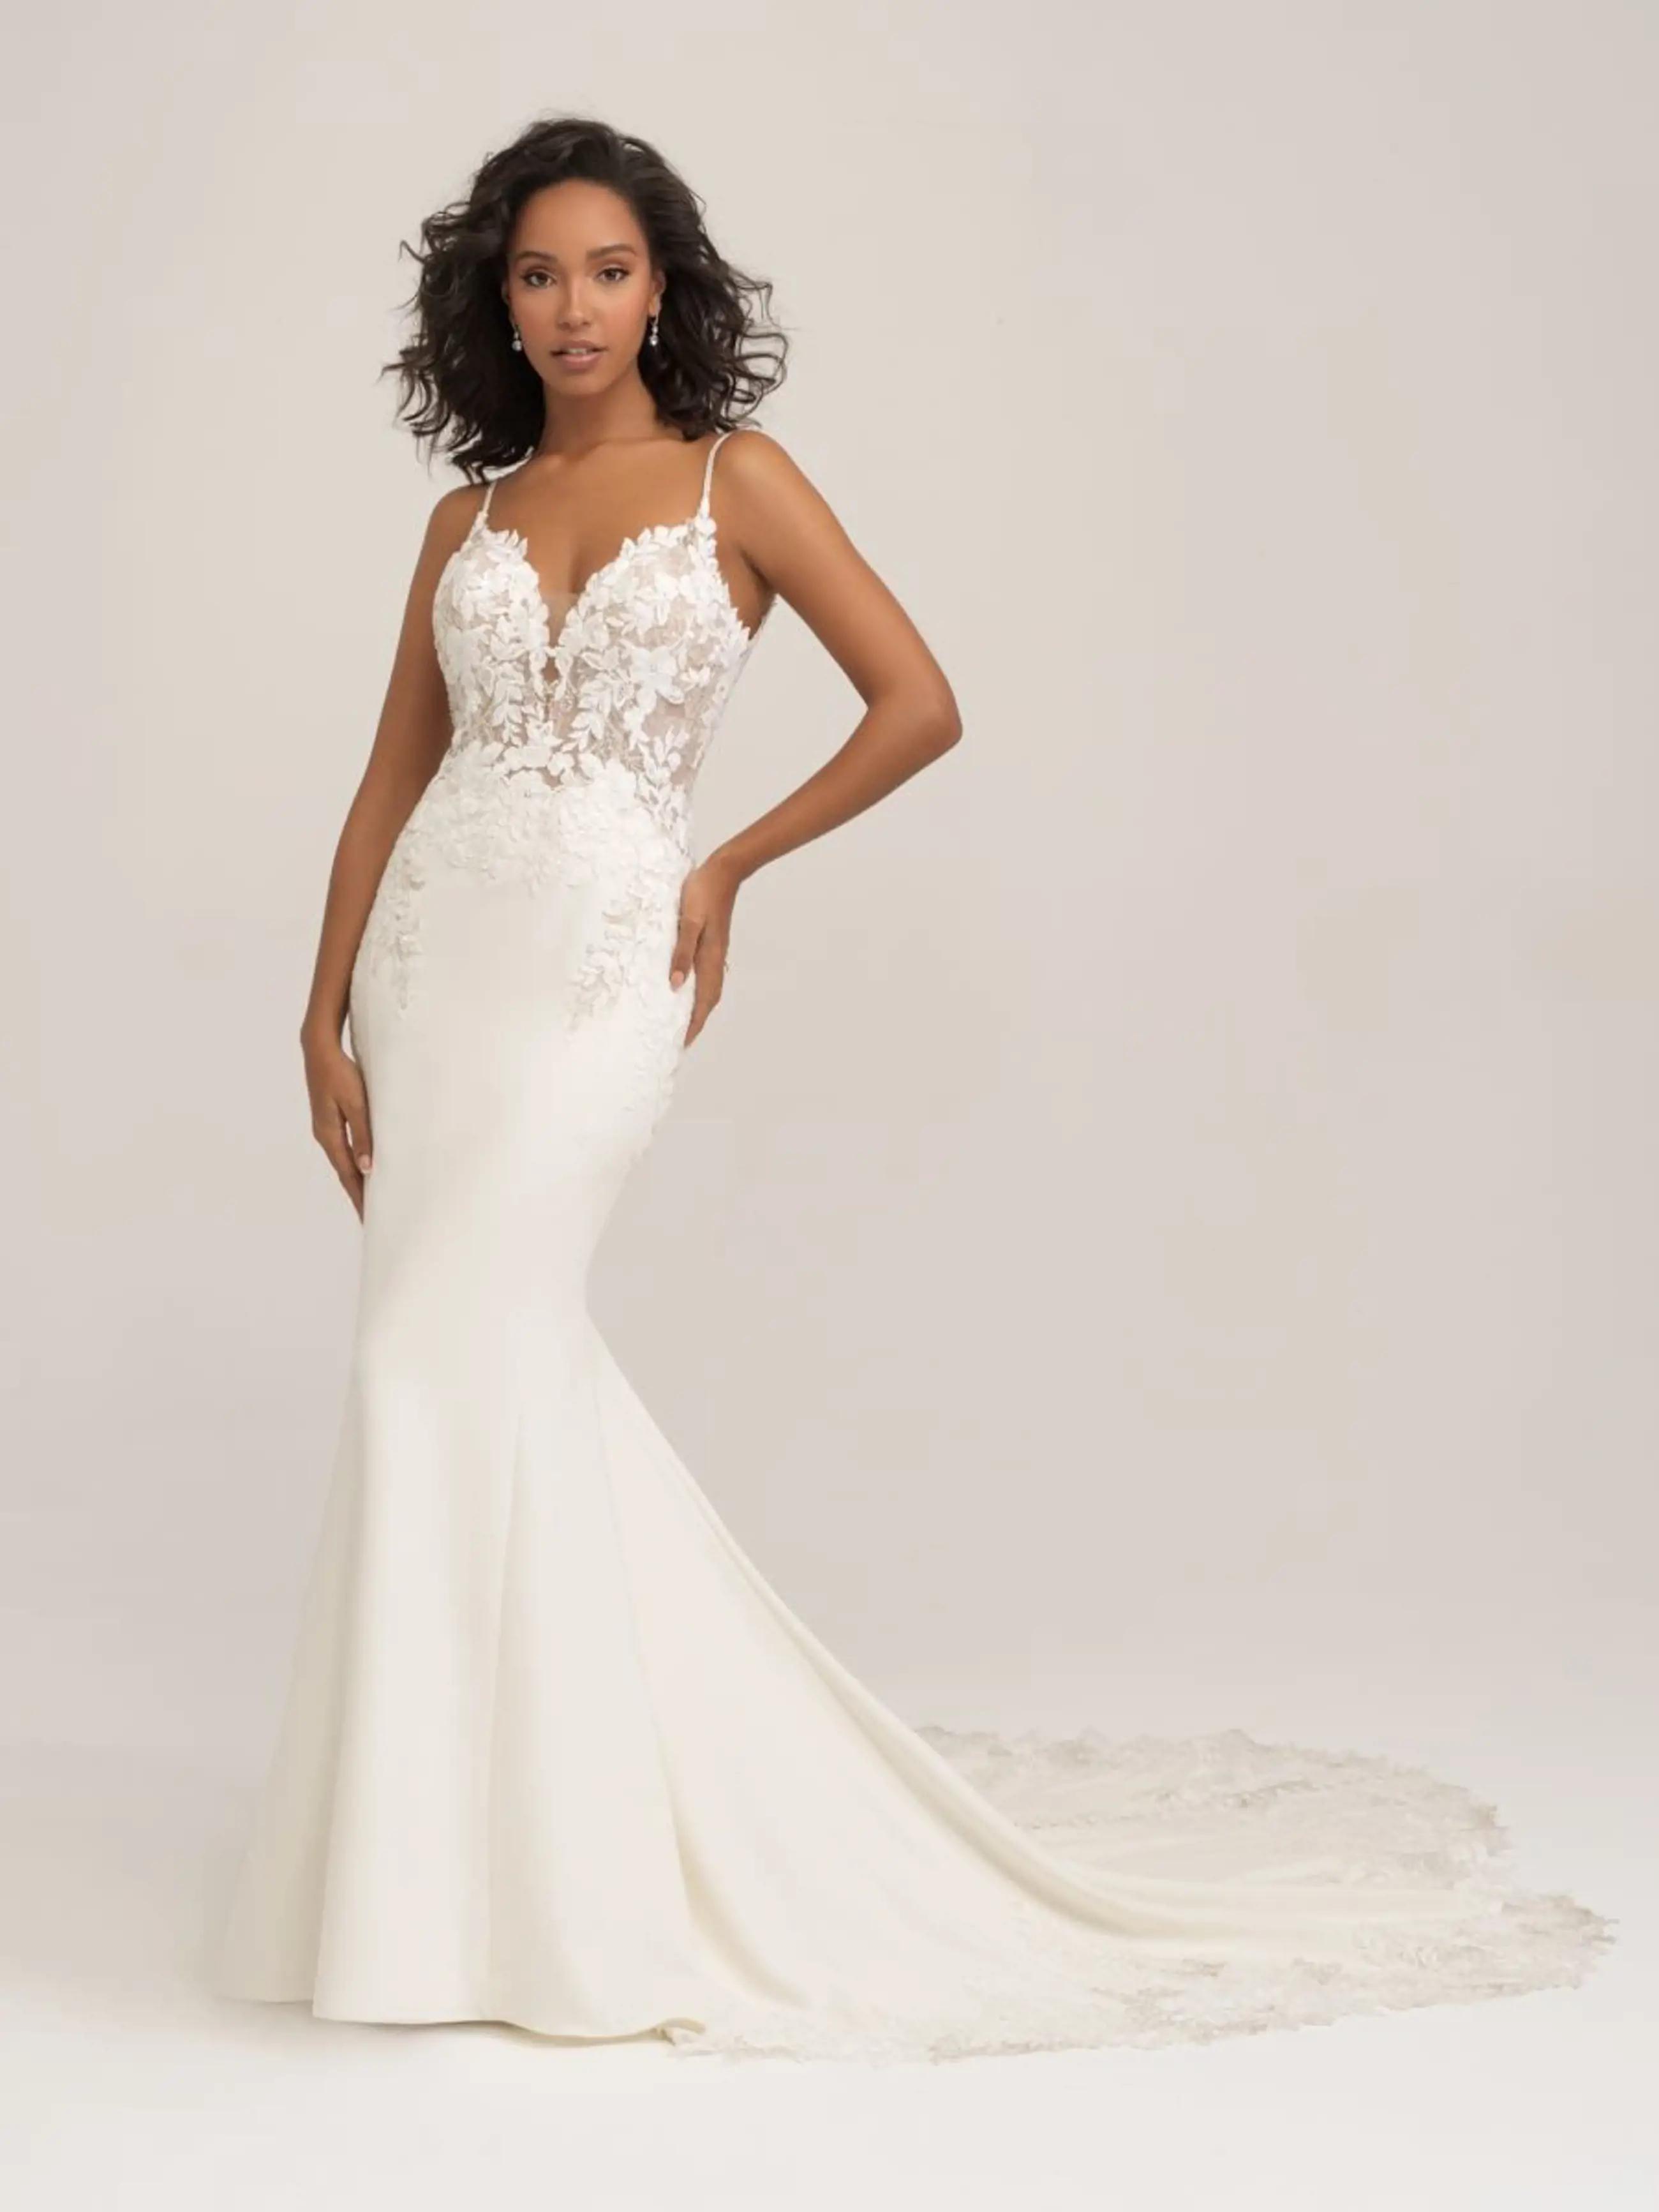 Model wearing an Allure Bridals gown